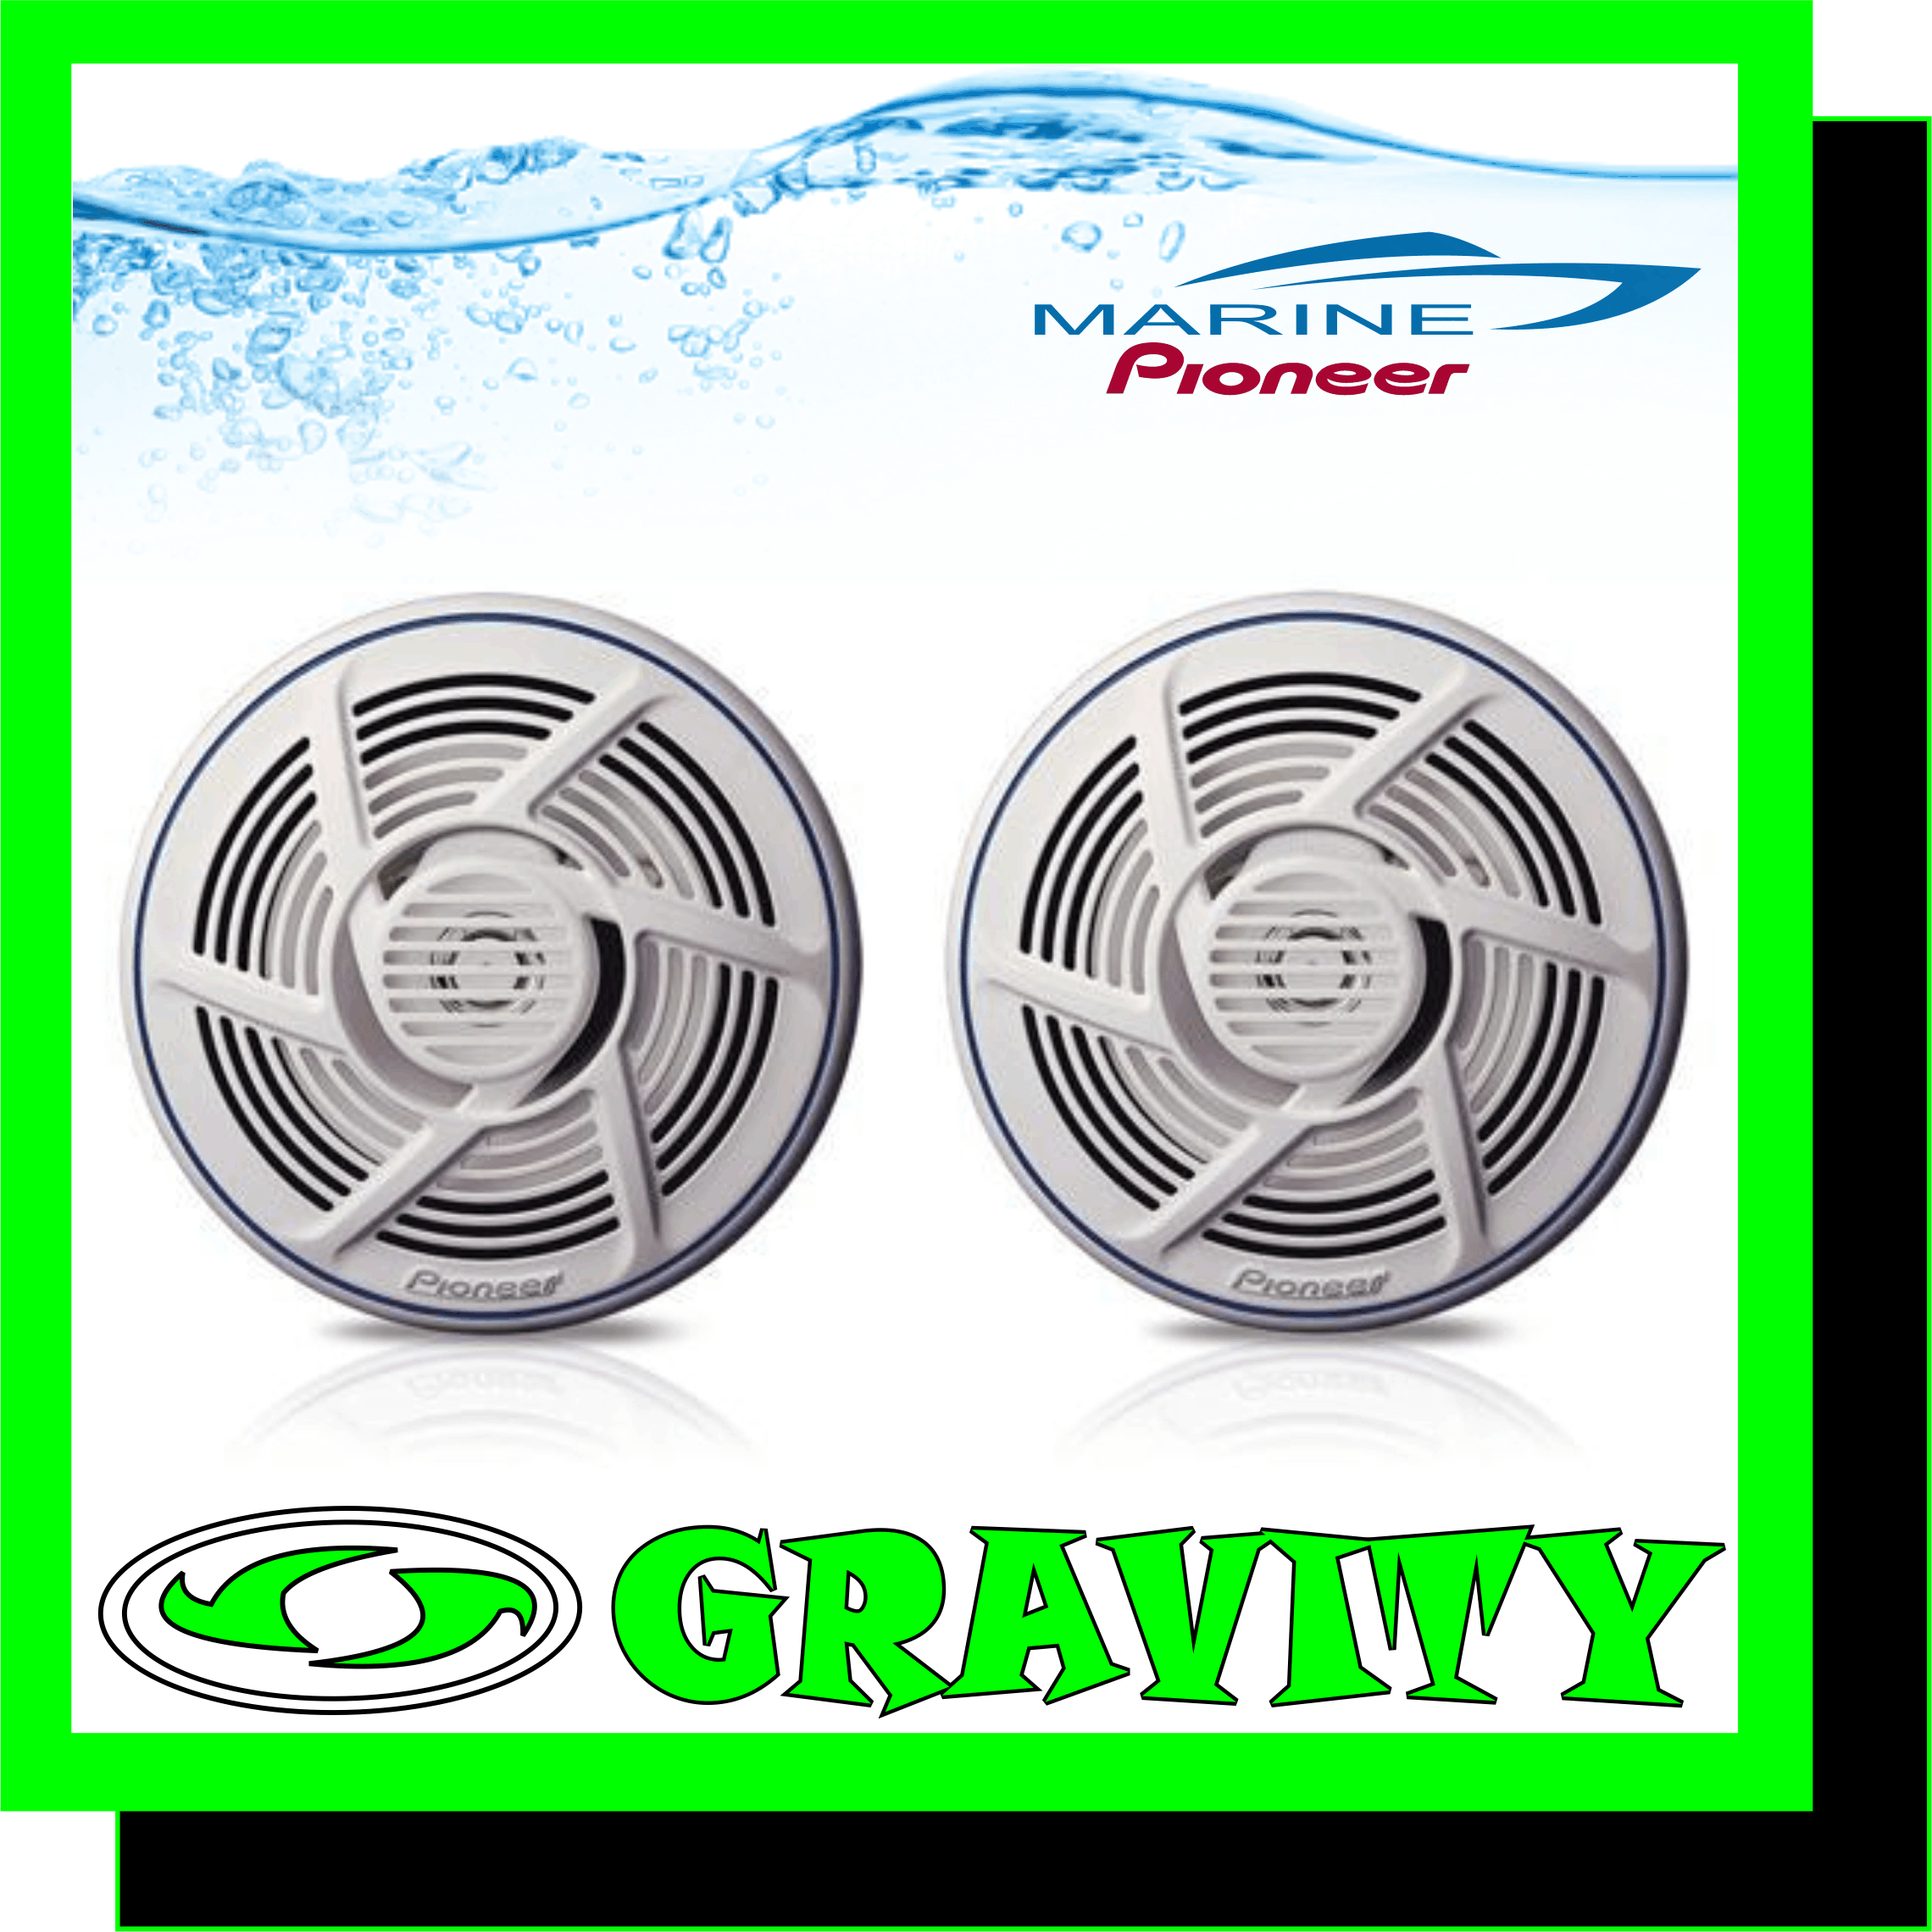 TS-MR1640 Nautica Series 6-1/2'' Marine-Use 2-Way Speaker with 160 Watts Max. Power  30 Watts Nominal Power White Water-Resistant IMPP Composite Cone Woofer 1-1/8? Poly-Ether Imide Dome Tweeter Max. Music Power (Nominal) 160 W (30 W)  Whether you're out on the water or at the dock, this 6-1/2? two-way speaker adds a new dimension to your boat. It's built specifically for marine use, with heavy-duty construction inside and out that strenuously resists water, corrosion, heat, and sunlight.  Key Features  Water-resistant IMPP Composite Cone ? Pioneer's popular injection molded polypylene (IMPP) cones produce outstanding mid-bass response and resist the effects of salt water, humidity and extreme heat. 1-1/8? Poly-Ether Imide Dome Tweeter with Magnetic Fluid ? This tweeter delivers rich, smooth highs.  Elastomer Surround ? Each speaker utilizes an elastomer surround that resists color fading or running, which extends the longevity of the product.  Acrylonitrile-Elastomer Styrene (AES) Glass Fiber Reinforced Basket/Magnet Cover ? The AES cover protects the magnetic circuit that can affect the performance of the speaker. The speakers also sport the pure white AES grilles to resist fading and yellowing caused by direct sunlight and heat.  Gold Tinsel Wire ? Gold tinsel wire and gold plated wire terminals are used for better current transfer.